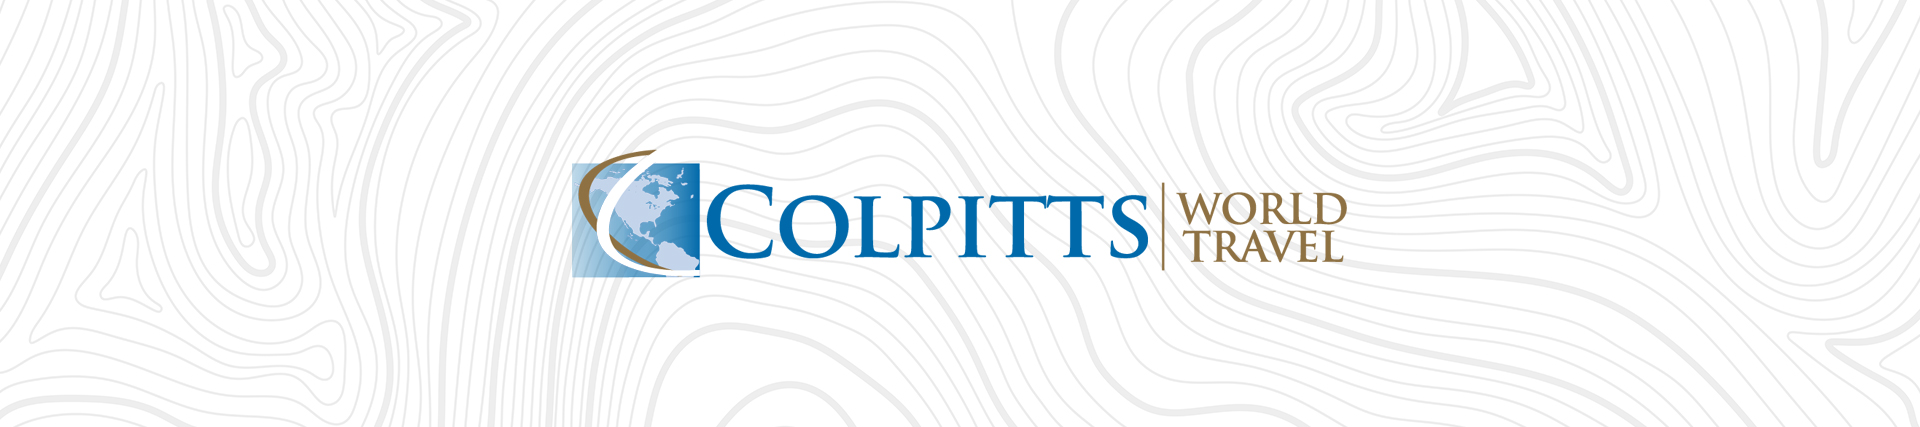 Direct Travel Announces Acquisition of Colpitts World Travel